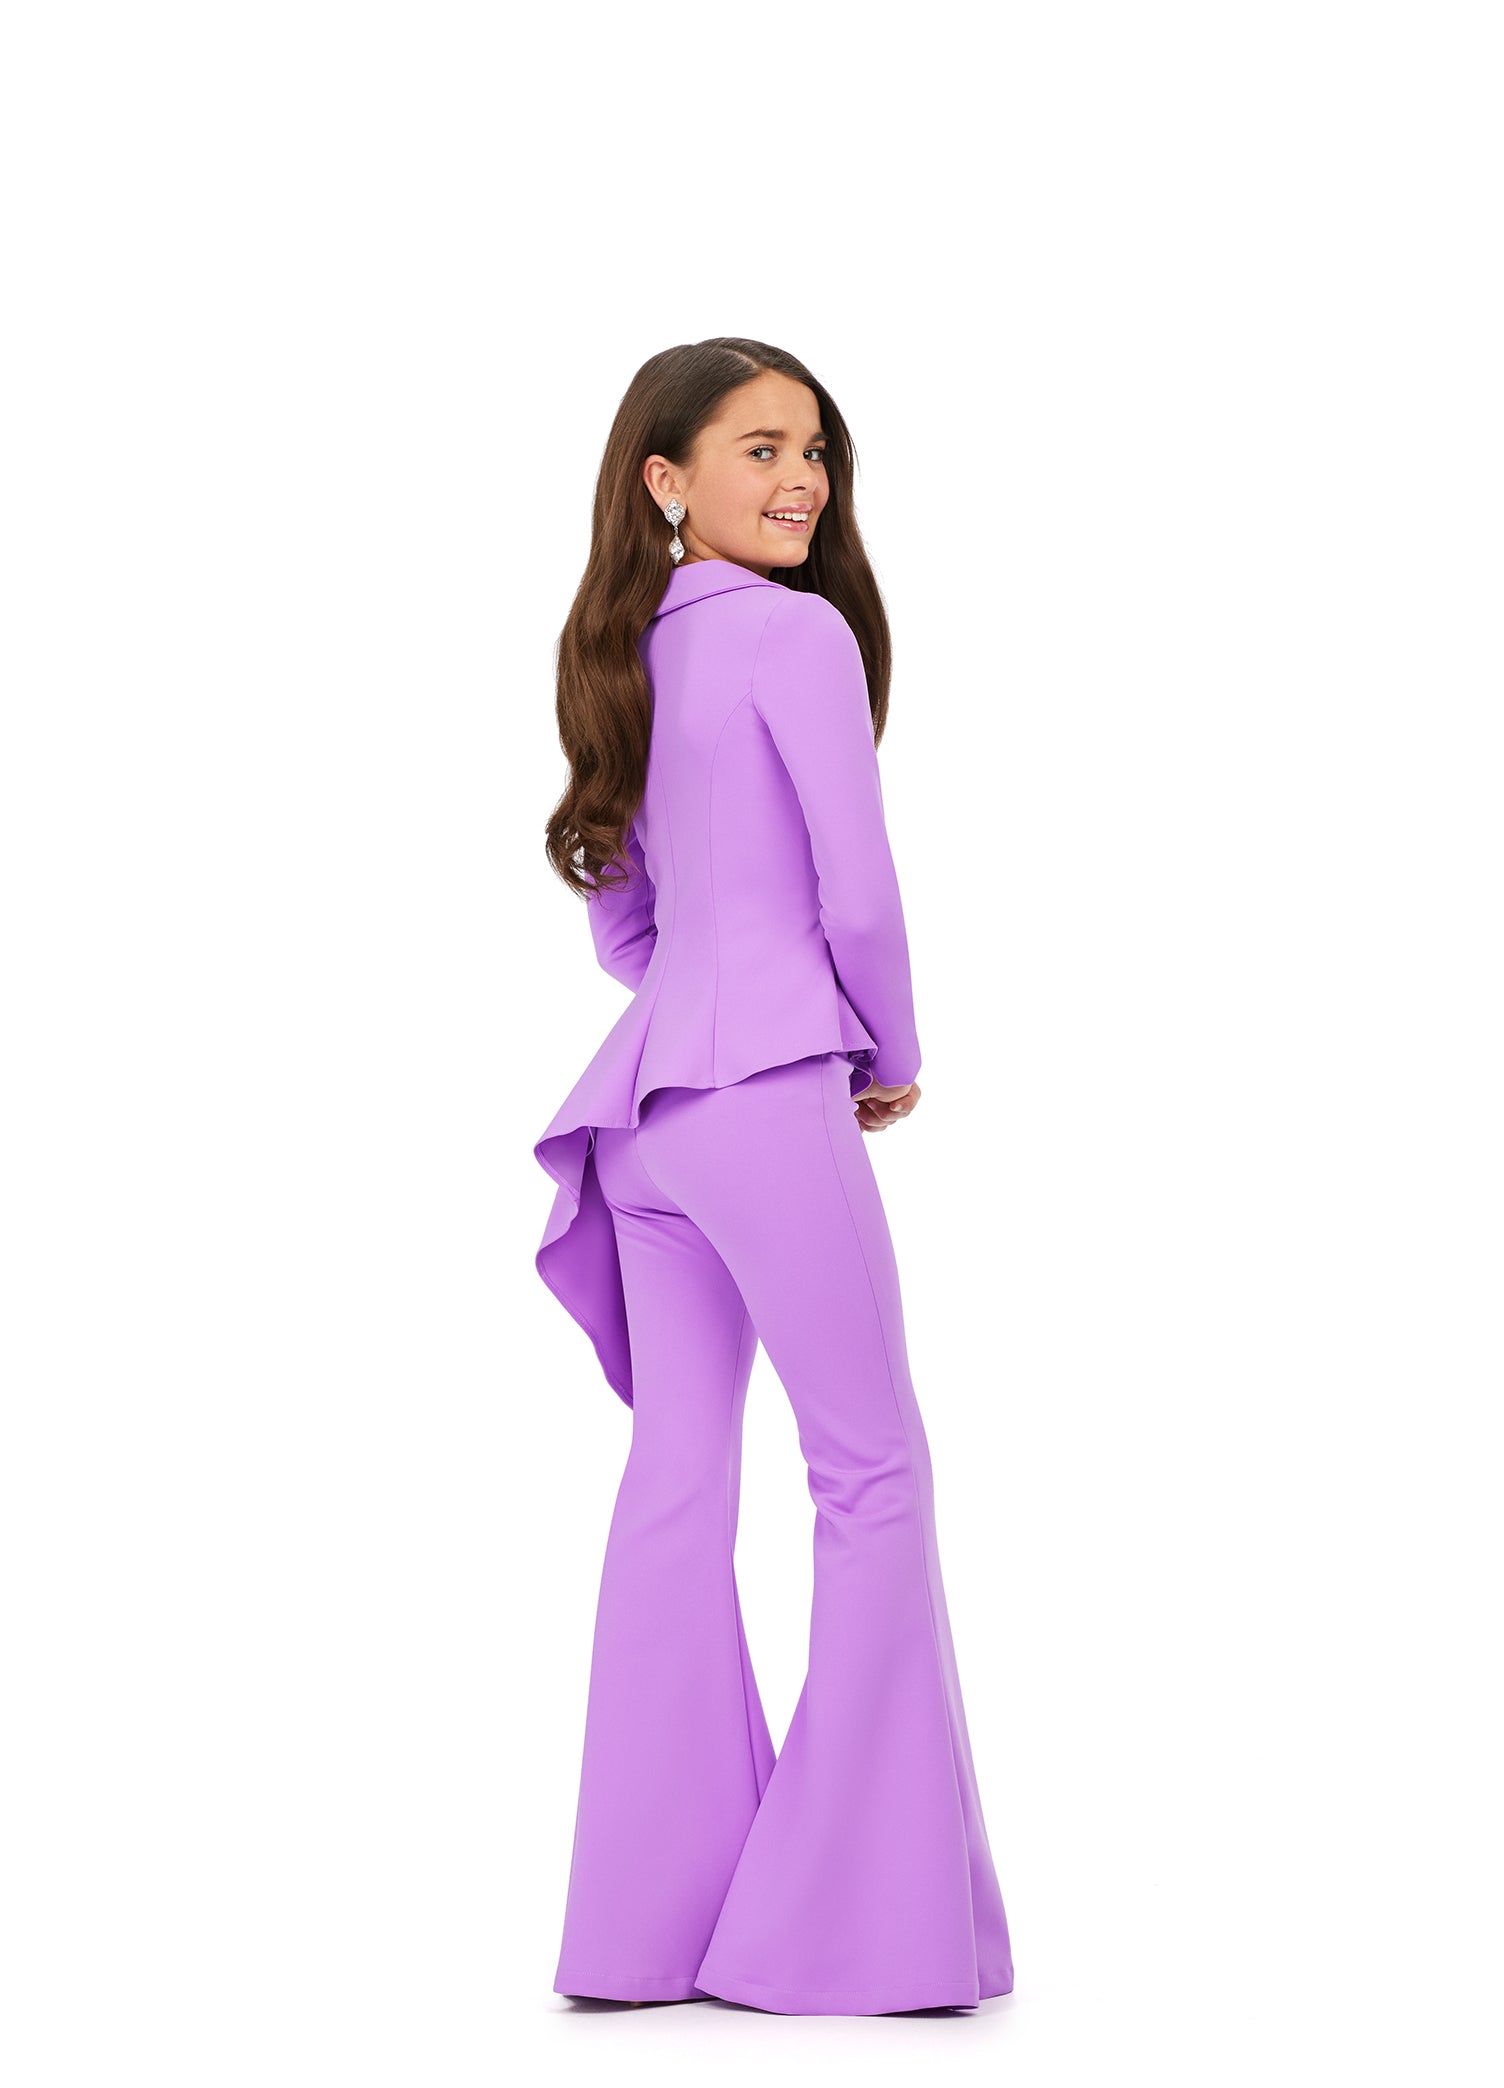 The Ashley Lauren Girls 8207 Long Sleeve Two Piece Scuba Jumpsuit is the perfect choice for any special occasion. This stylish two piece features an asymmetric hem and flare pant legs, perfect for making a statement while maintaining a professional look. With this time-tested jumpsuit, make a lasting impression on the pageant or job interview platform.  Sizes: 4-16  Colors: Orchid, Hot Pink, Green